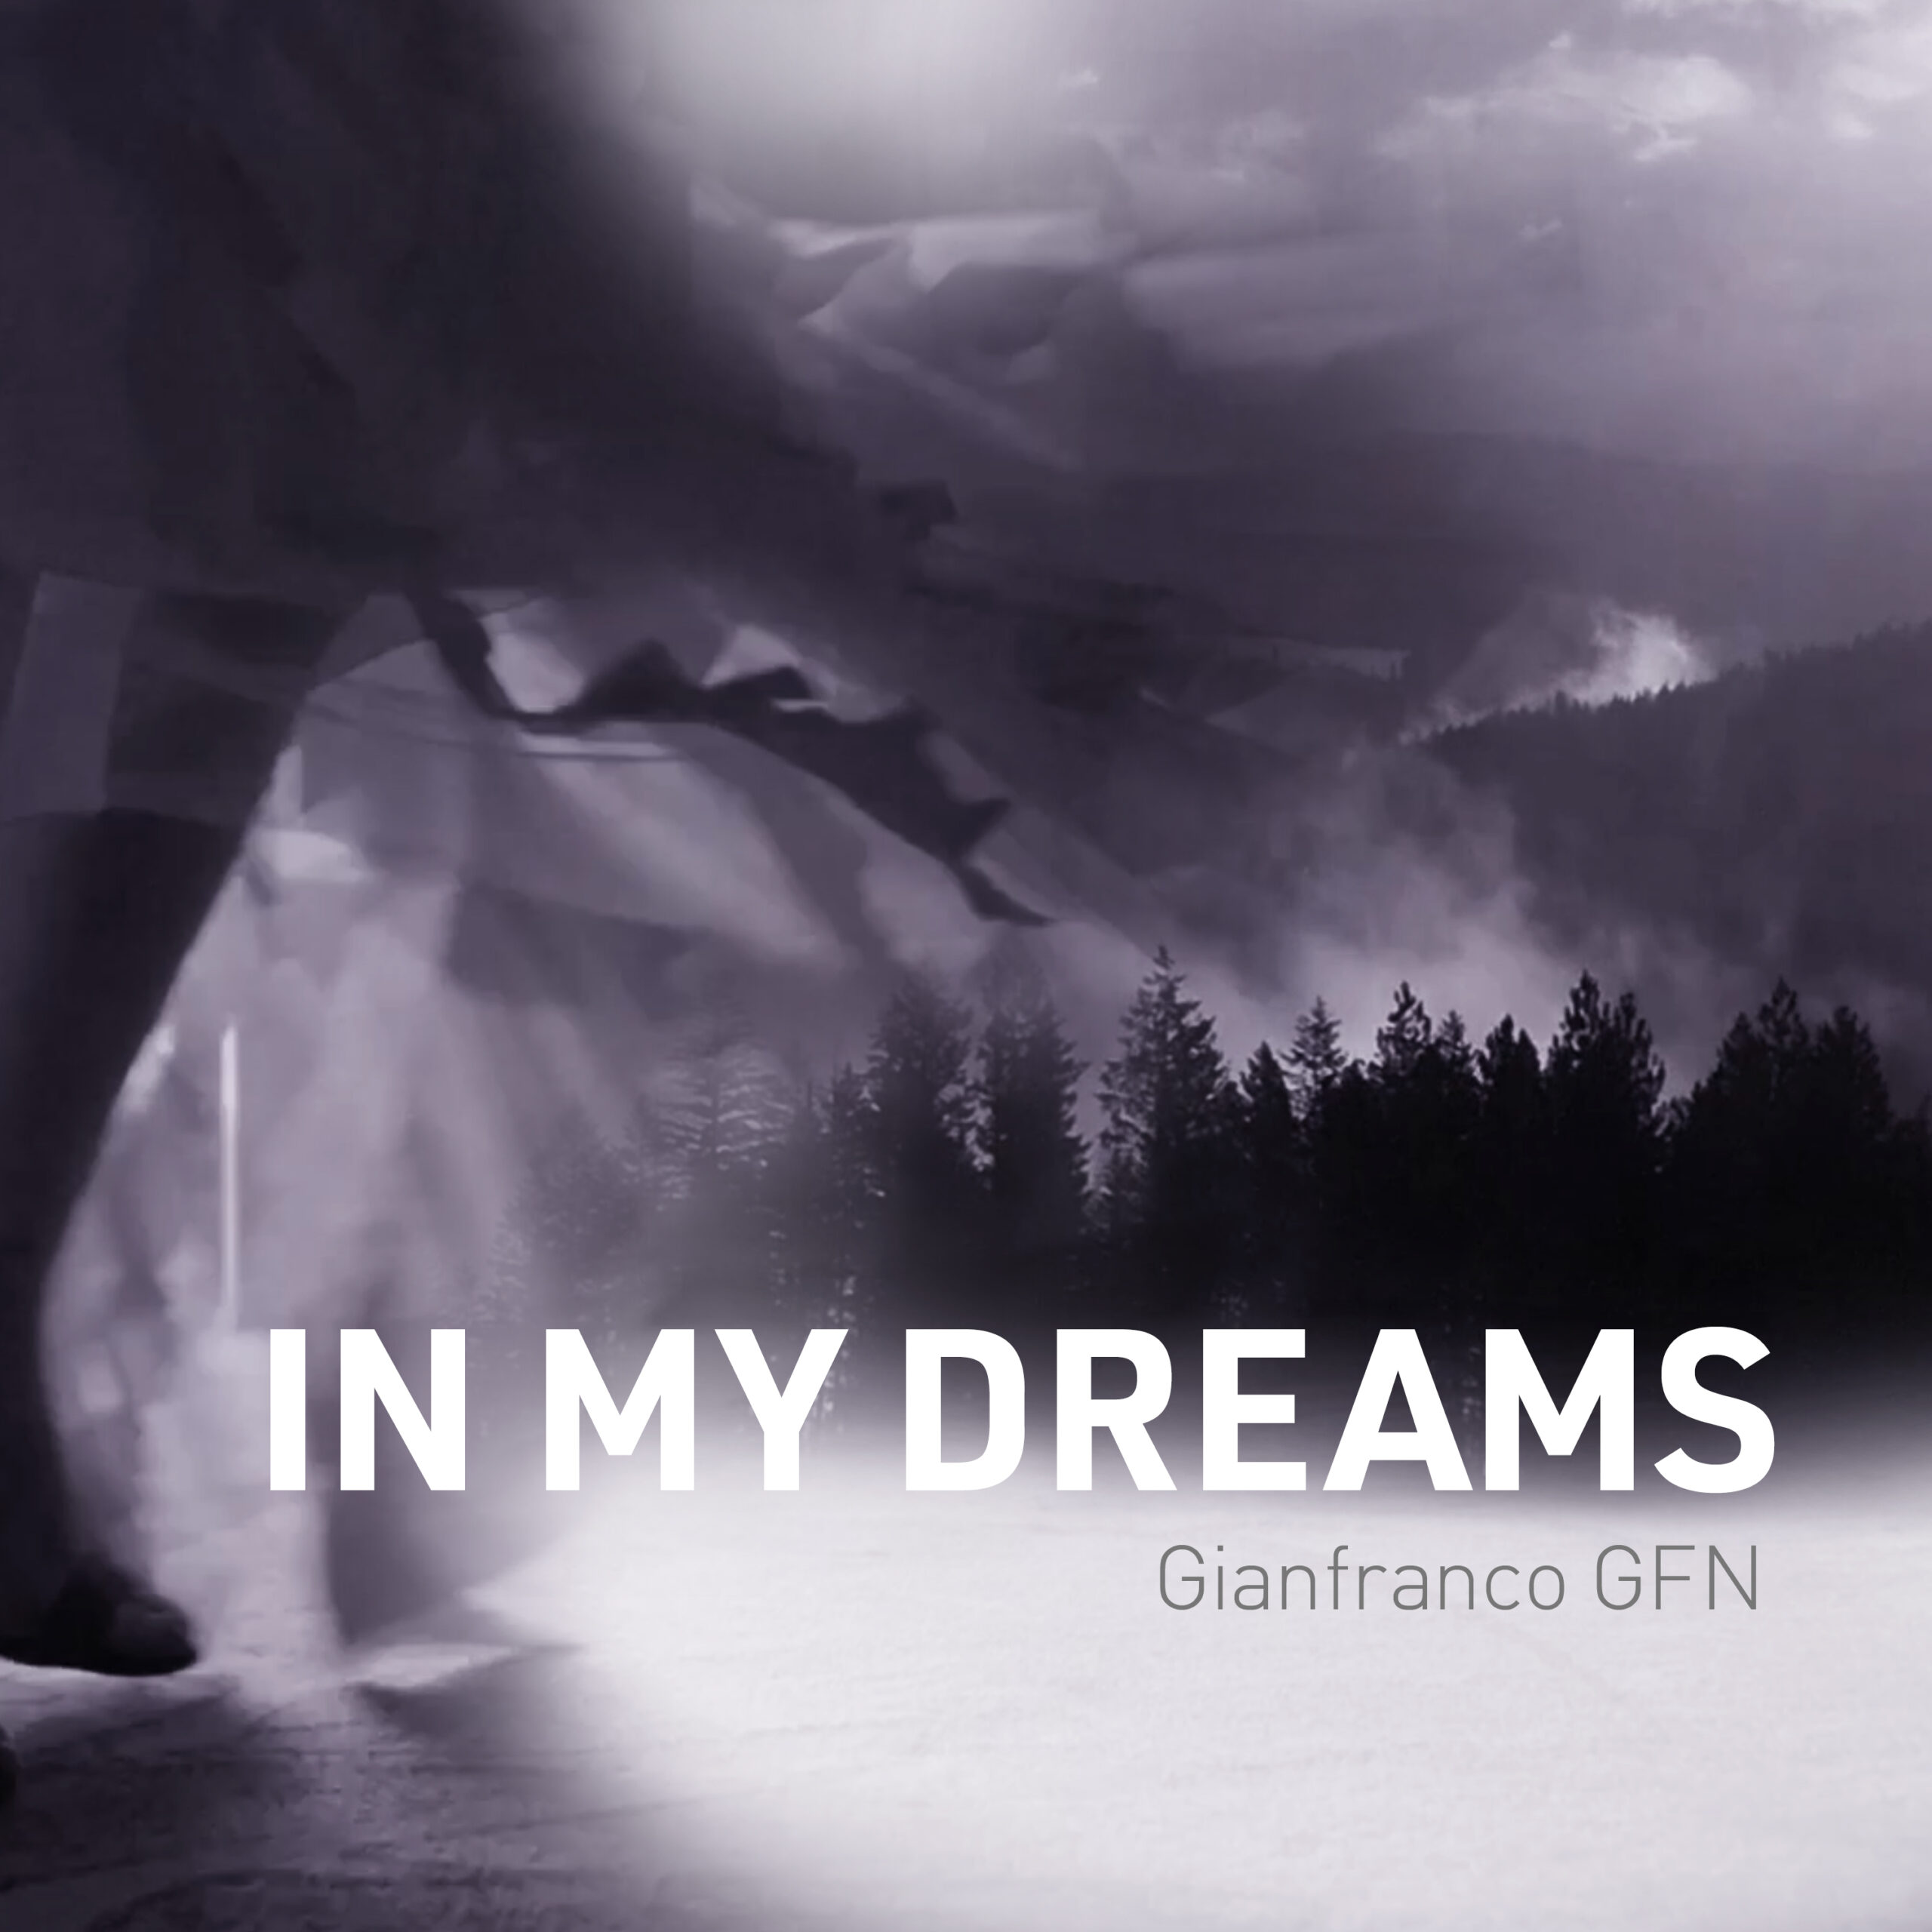 Gianfranco GFN’s Latest Release “In My Dreams”: A Musical Journey of Yearning and Reality